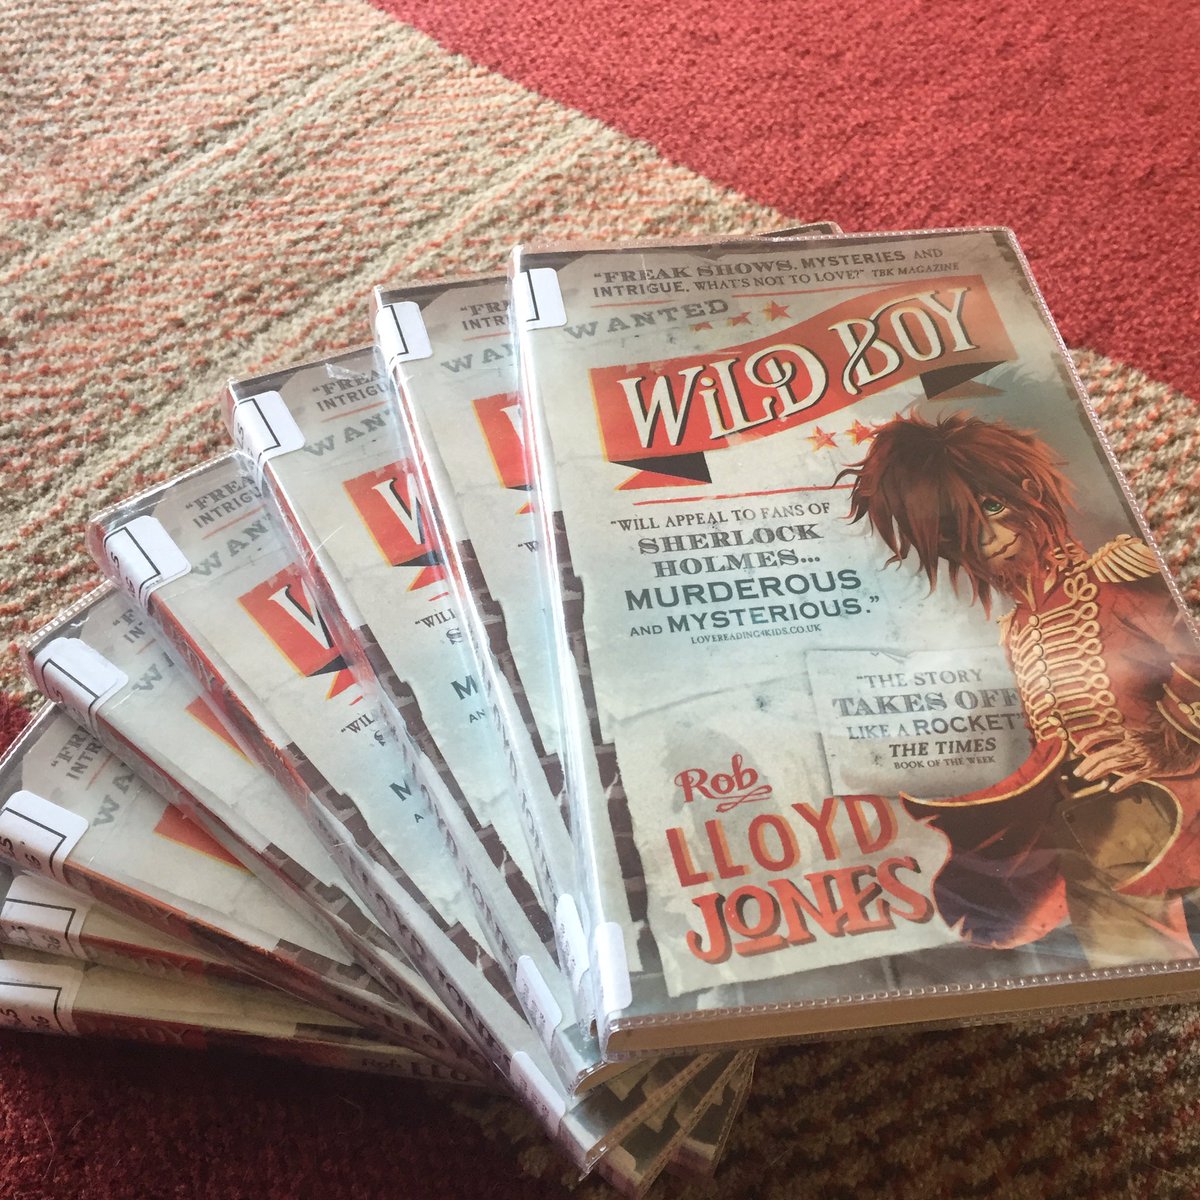 ..and a full set of @RLloydJones amazing book Wild Boy which I’m so excited to use to set up book club. #SchoolsLibraryService #primary